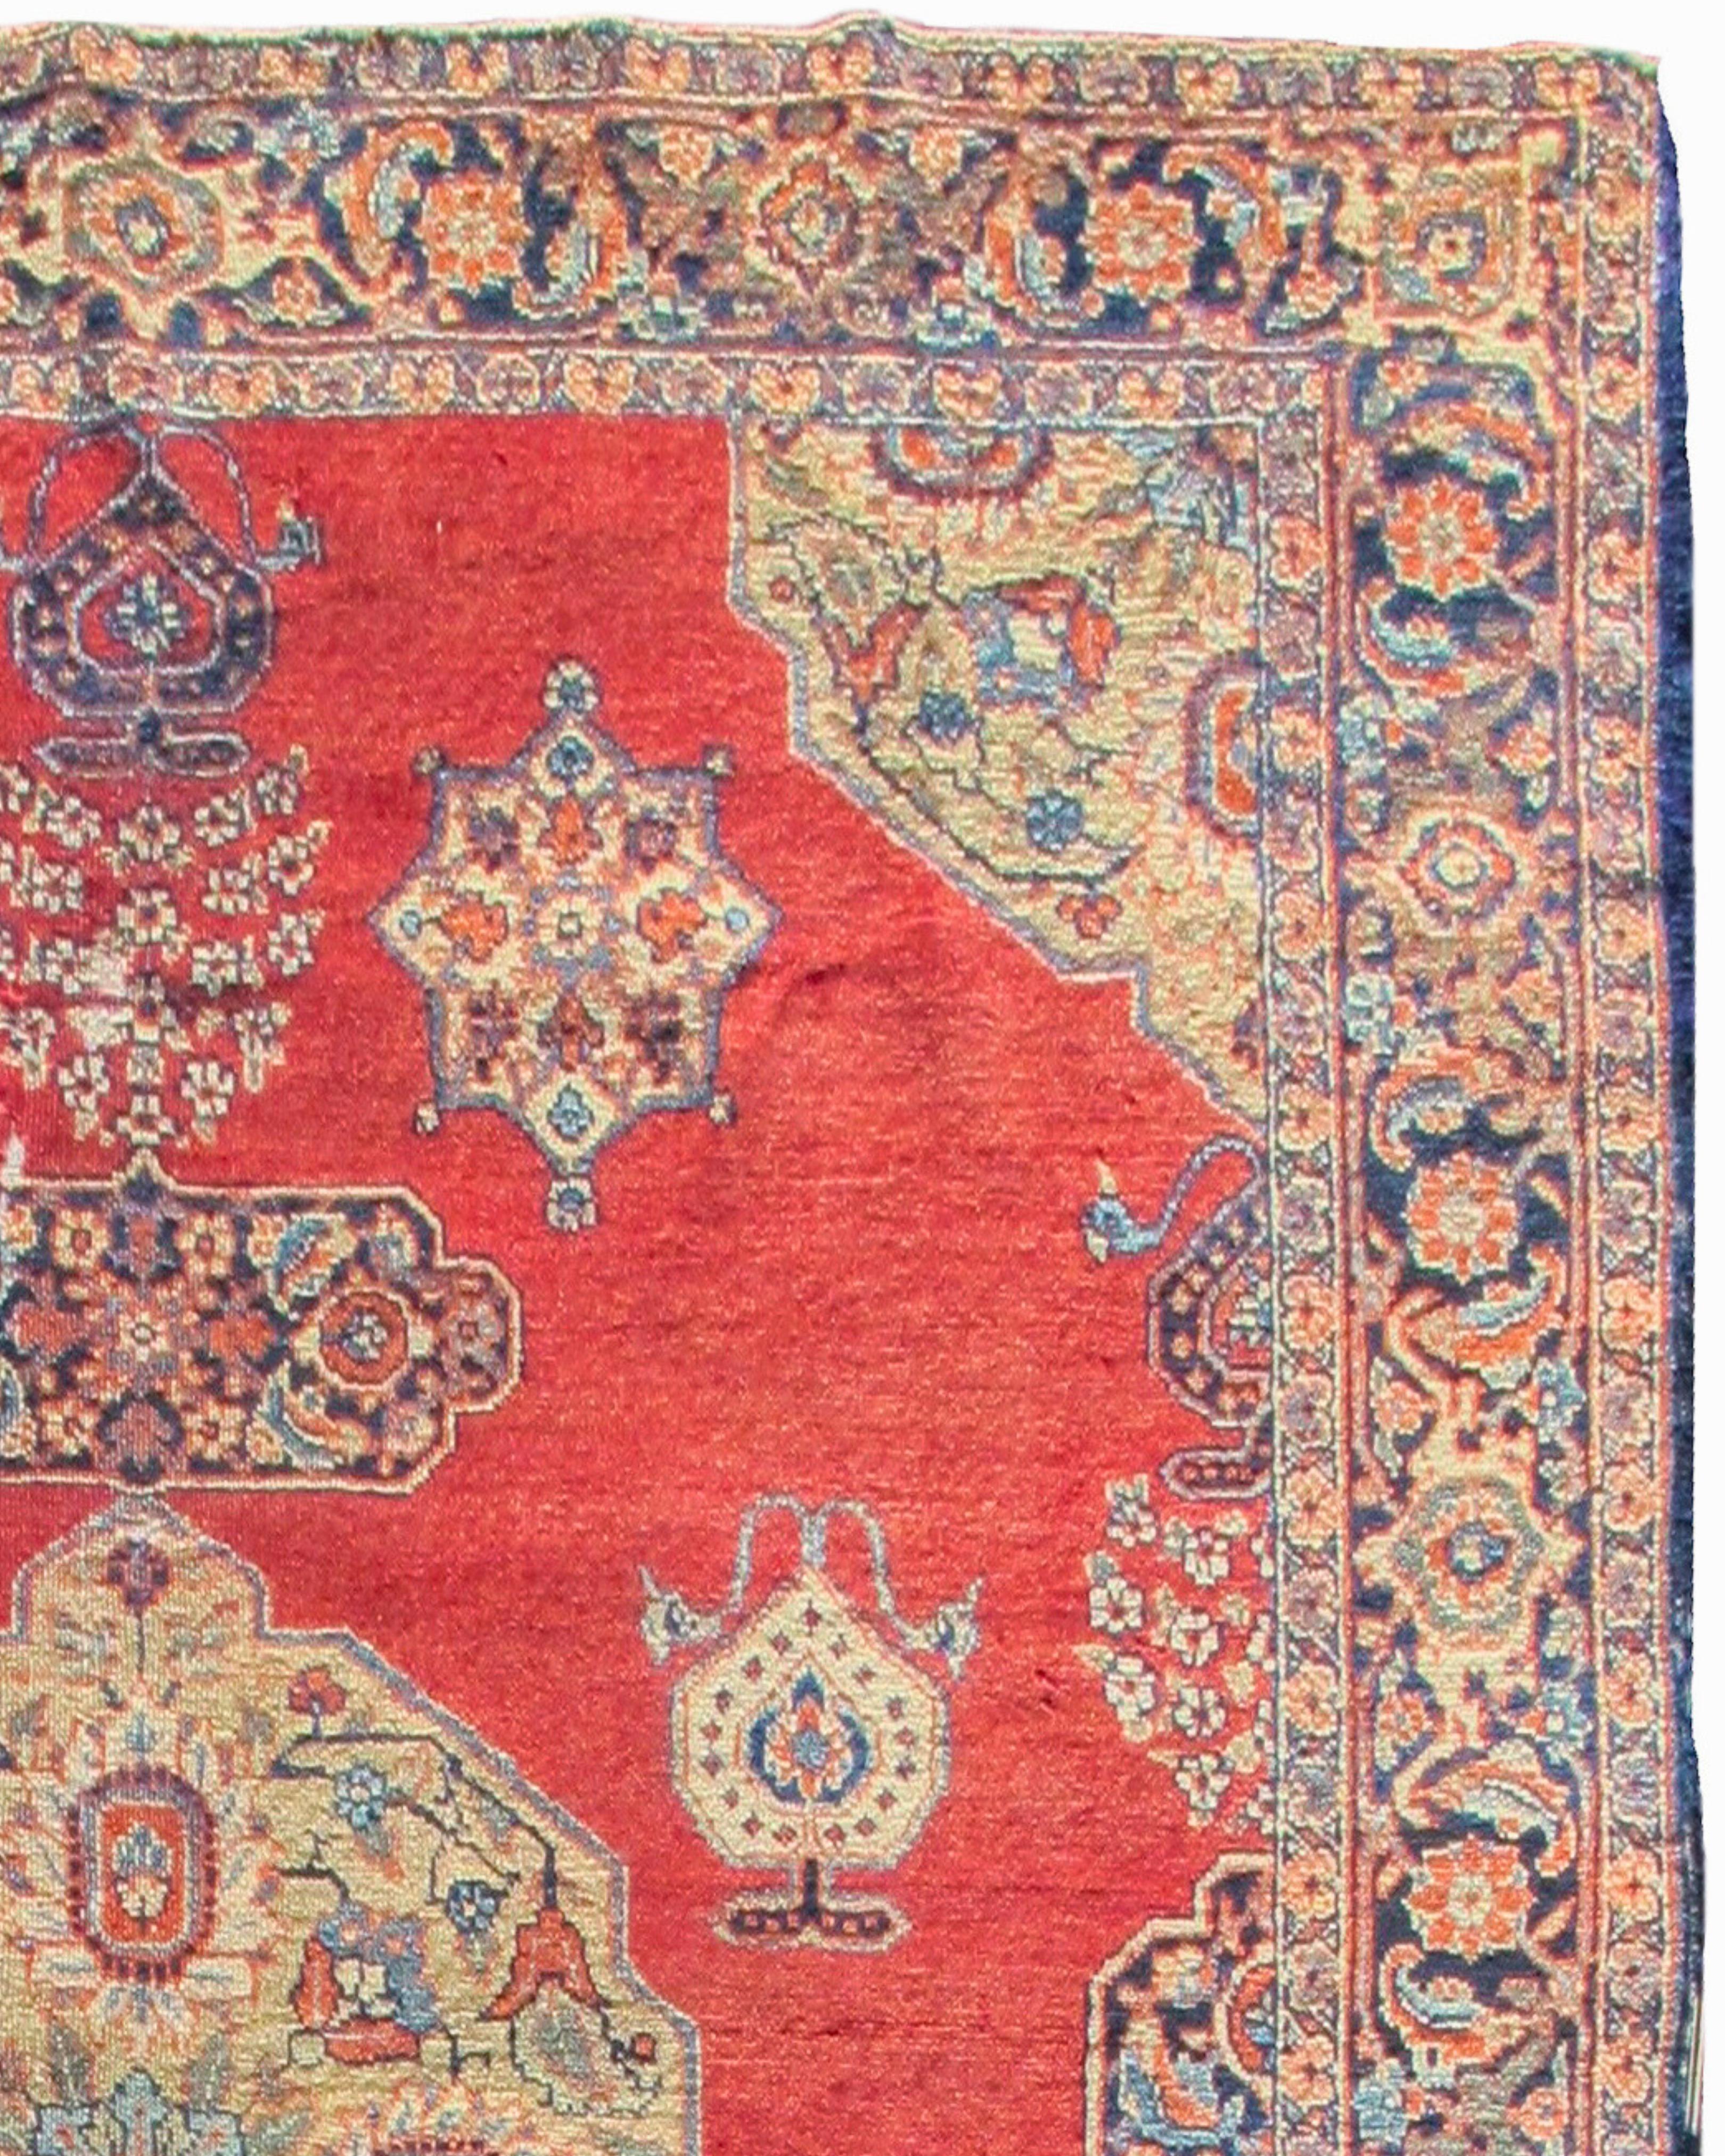 Antique Persian Tabriz Rug, c. 1900

Very good condition.

Additional Information:
Dimensions: 6'2